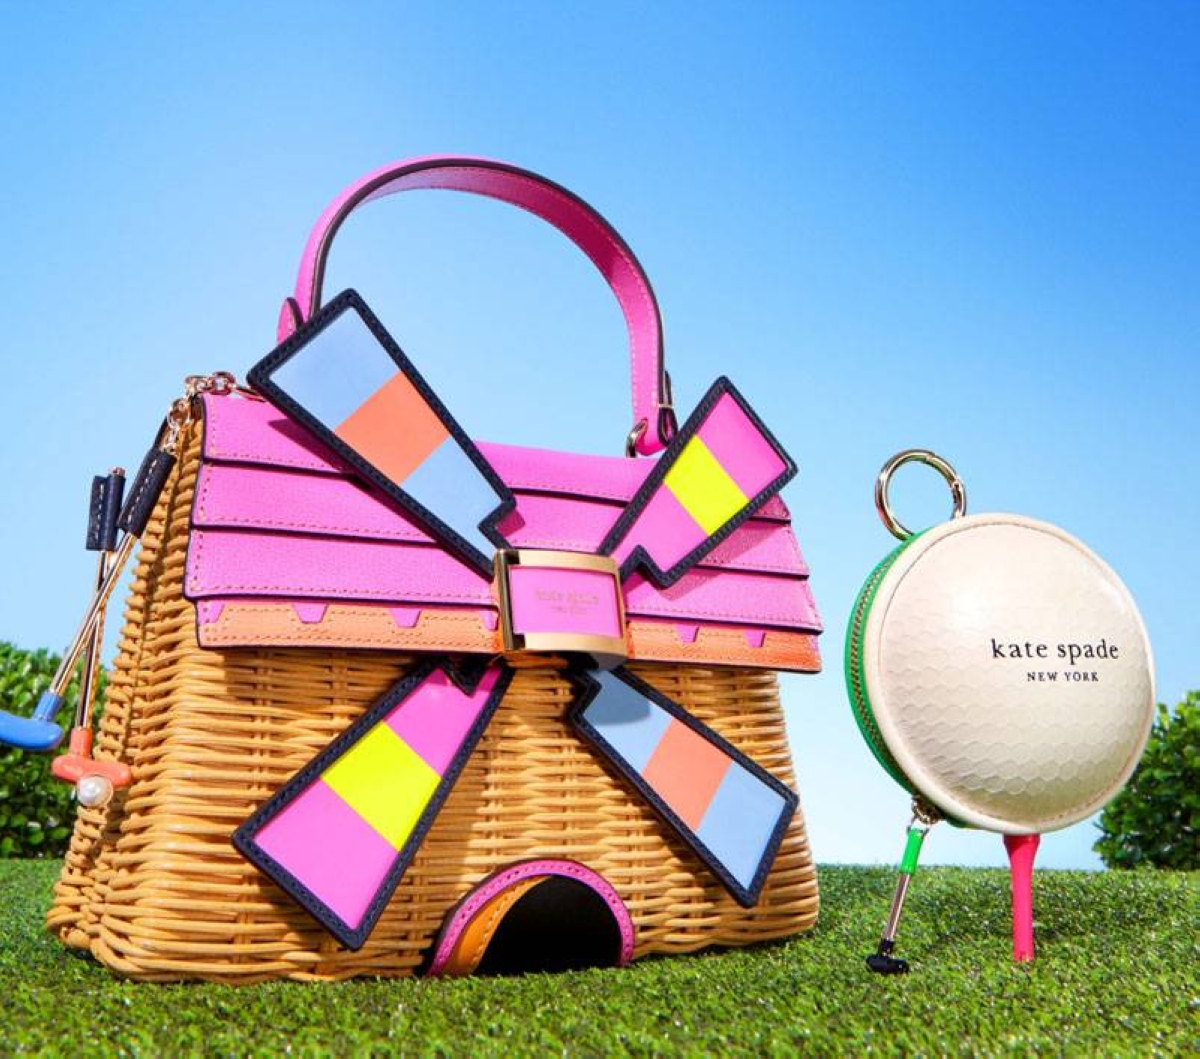 Kate Spade New York embraces golf in its Tee Time novelty collection.